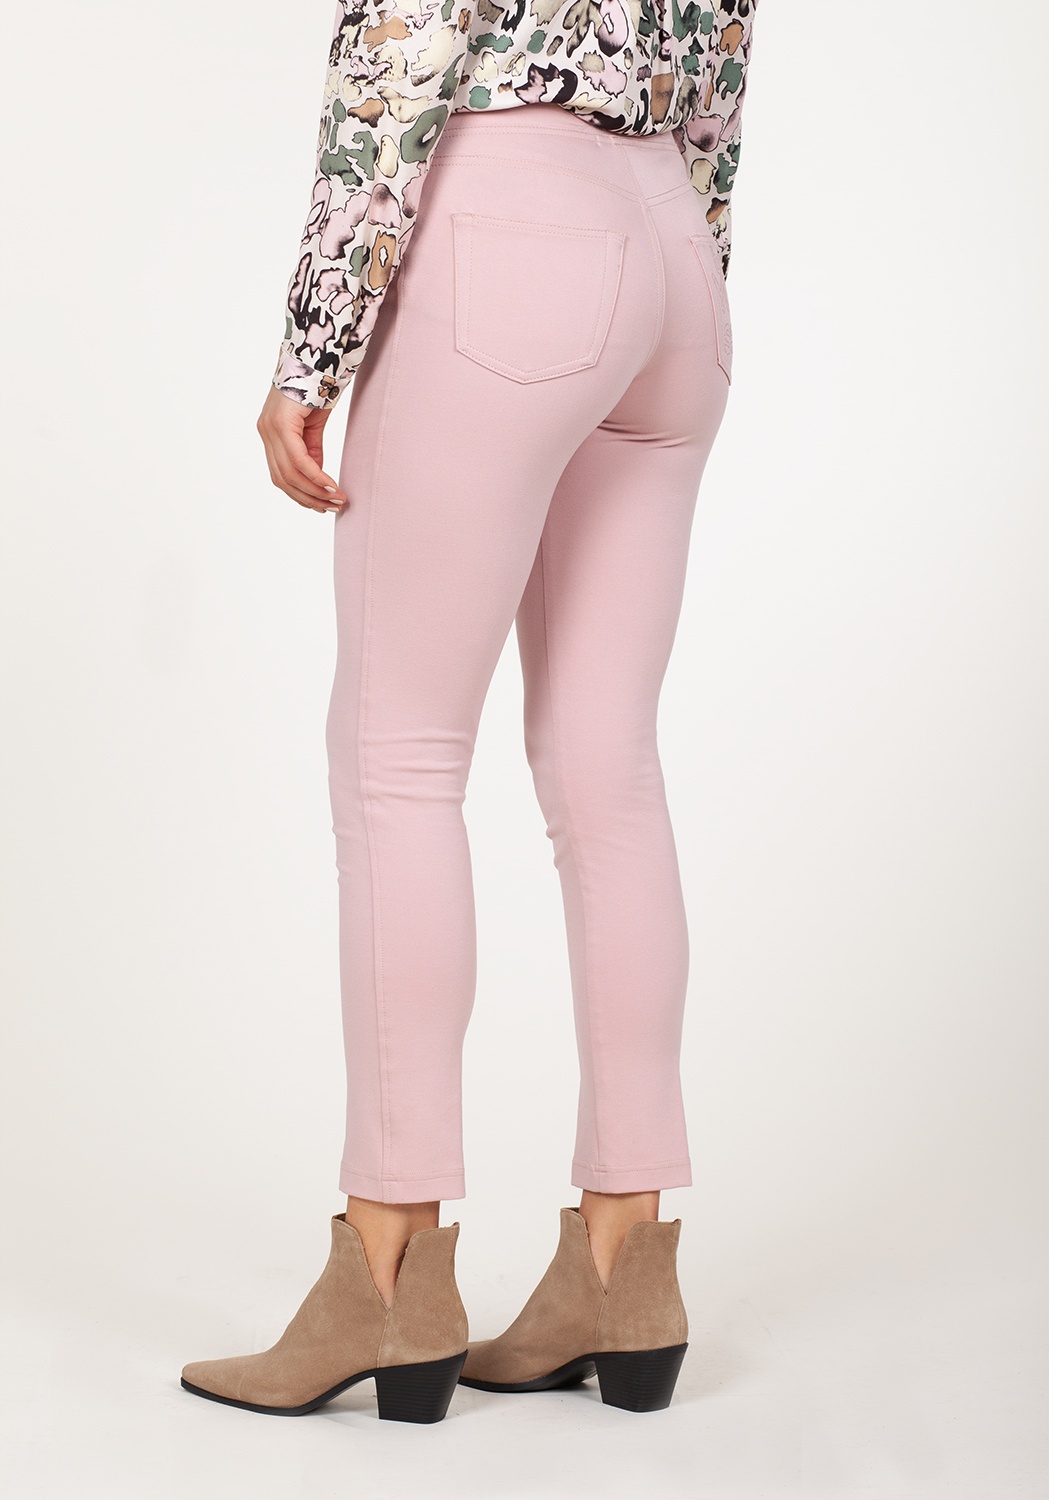 Knit Pink Trousers 3